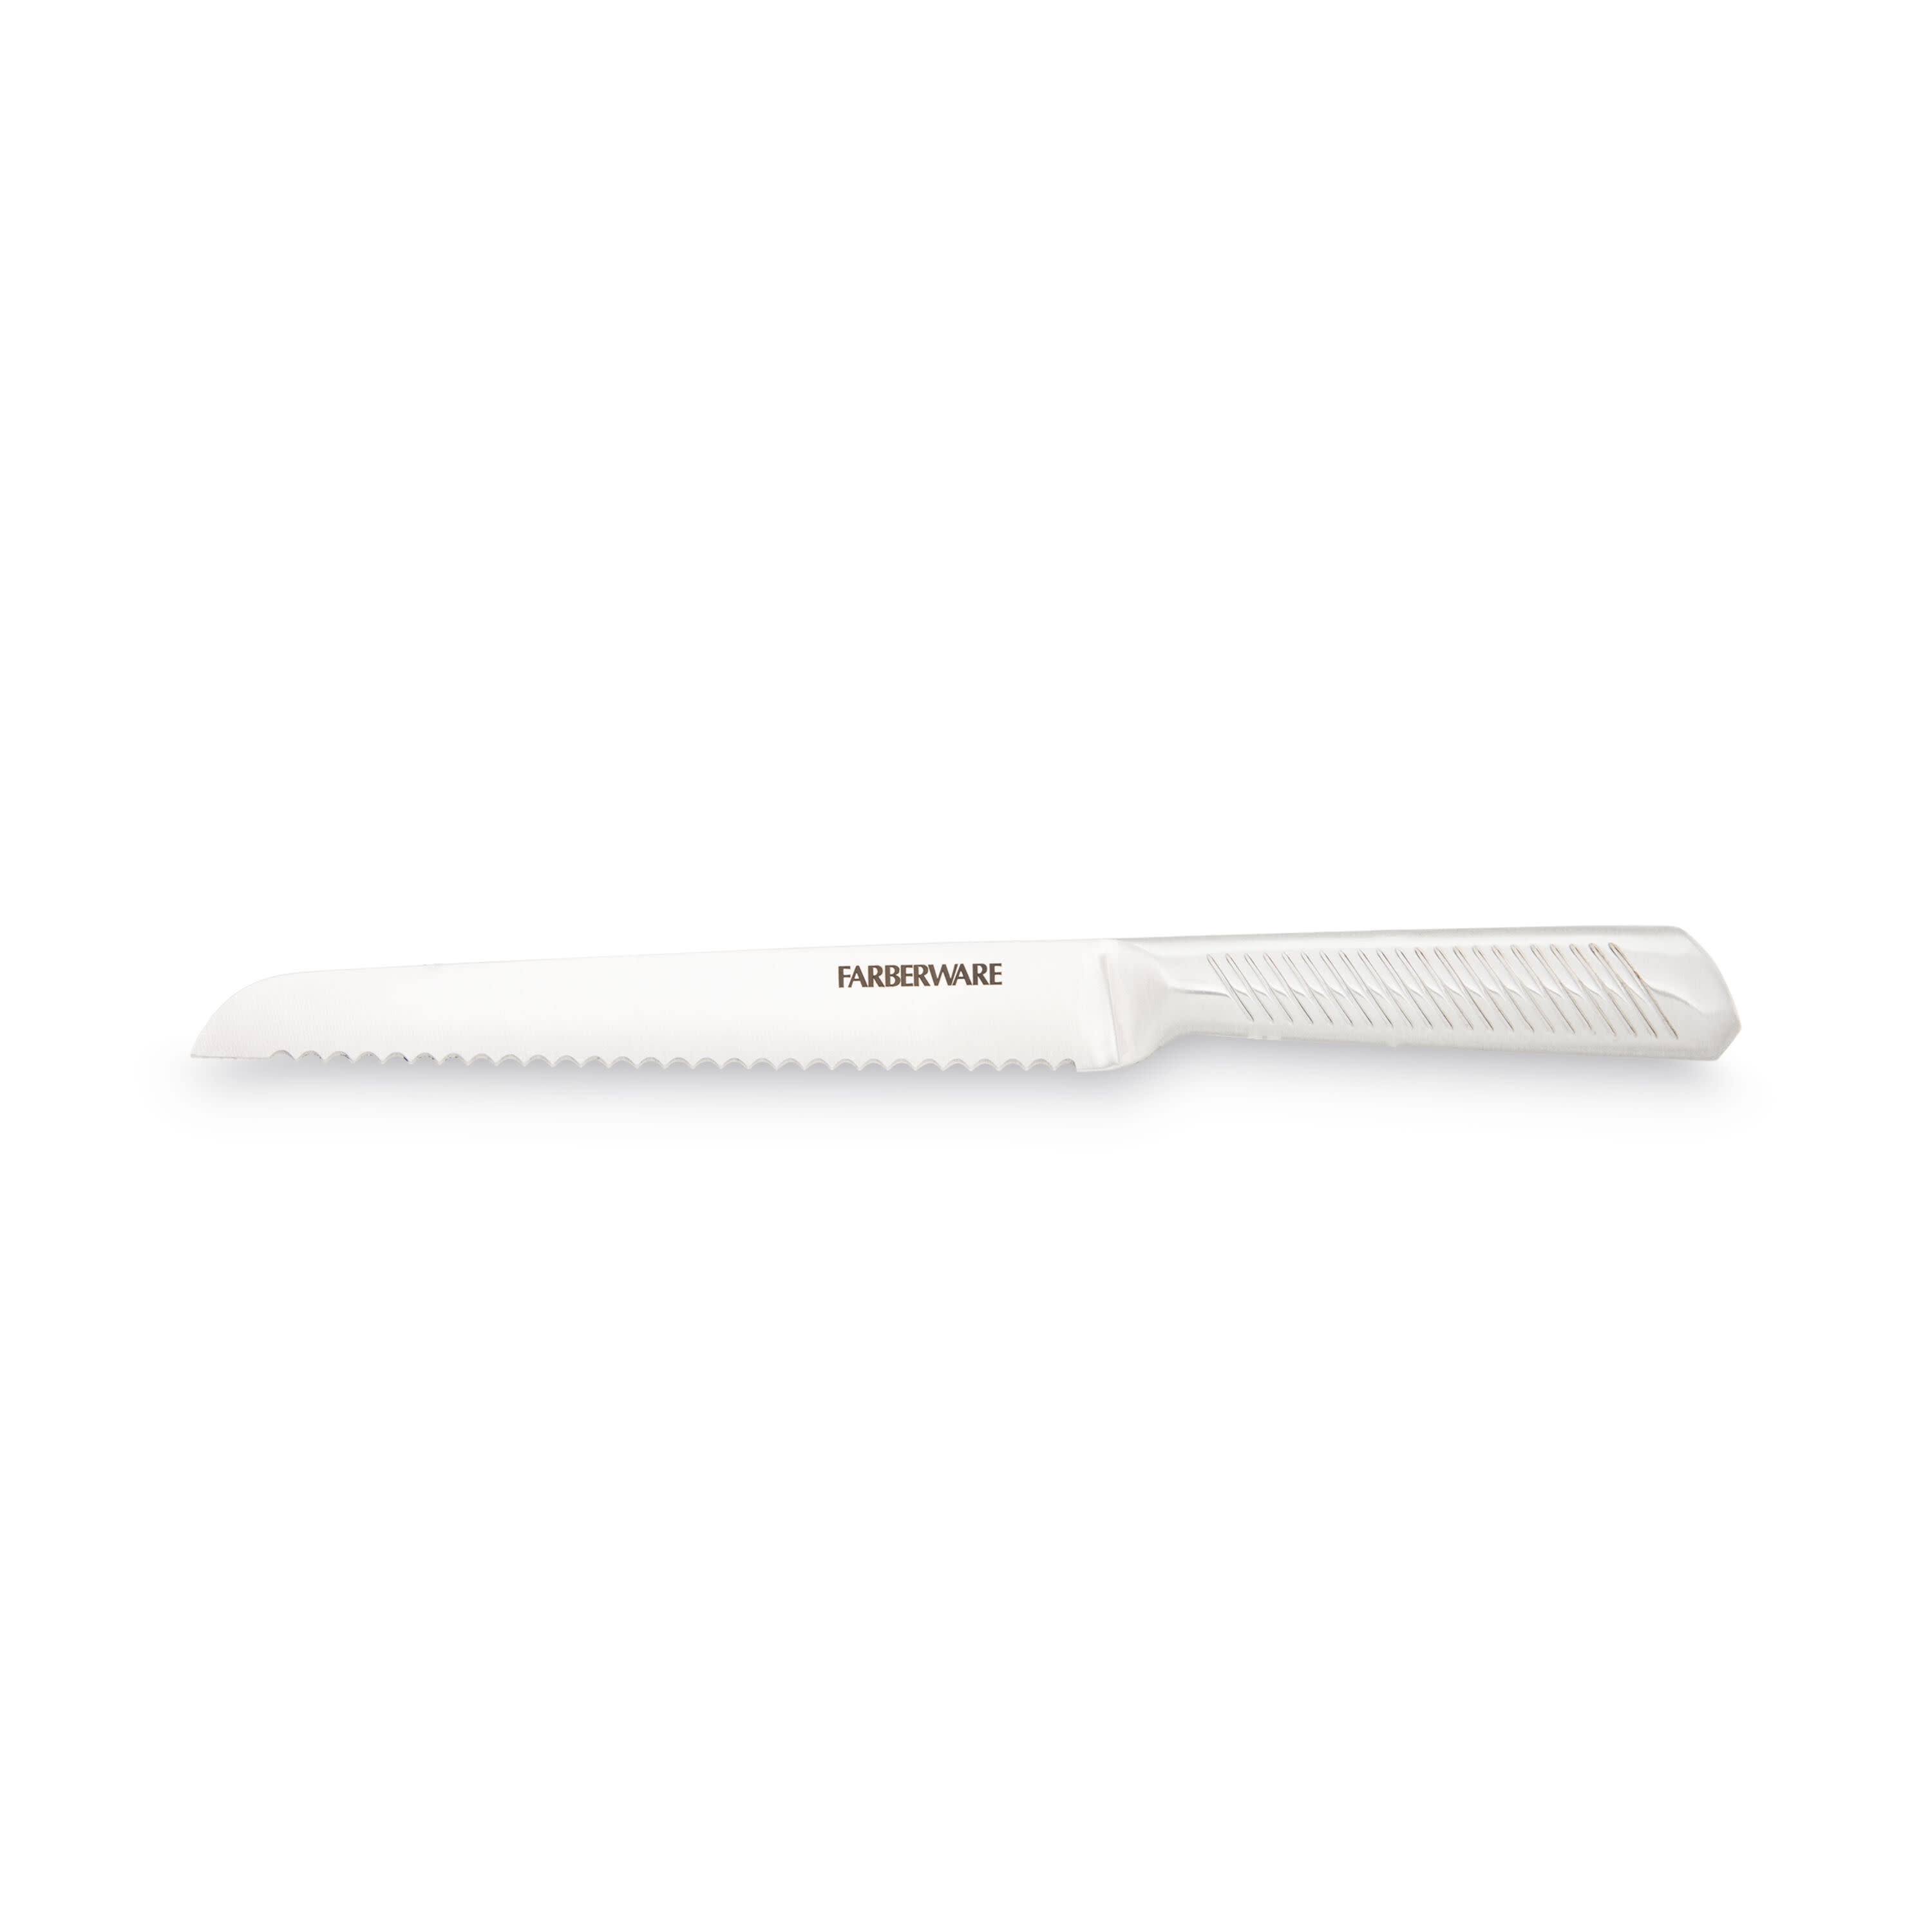 Farberware Professional 8-inch Forged Textured Stainless Steel Bread Knife